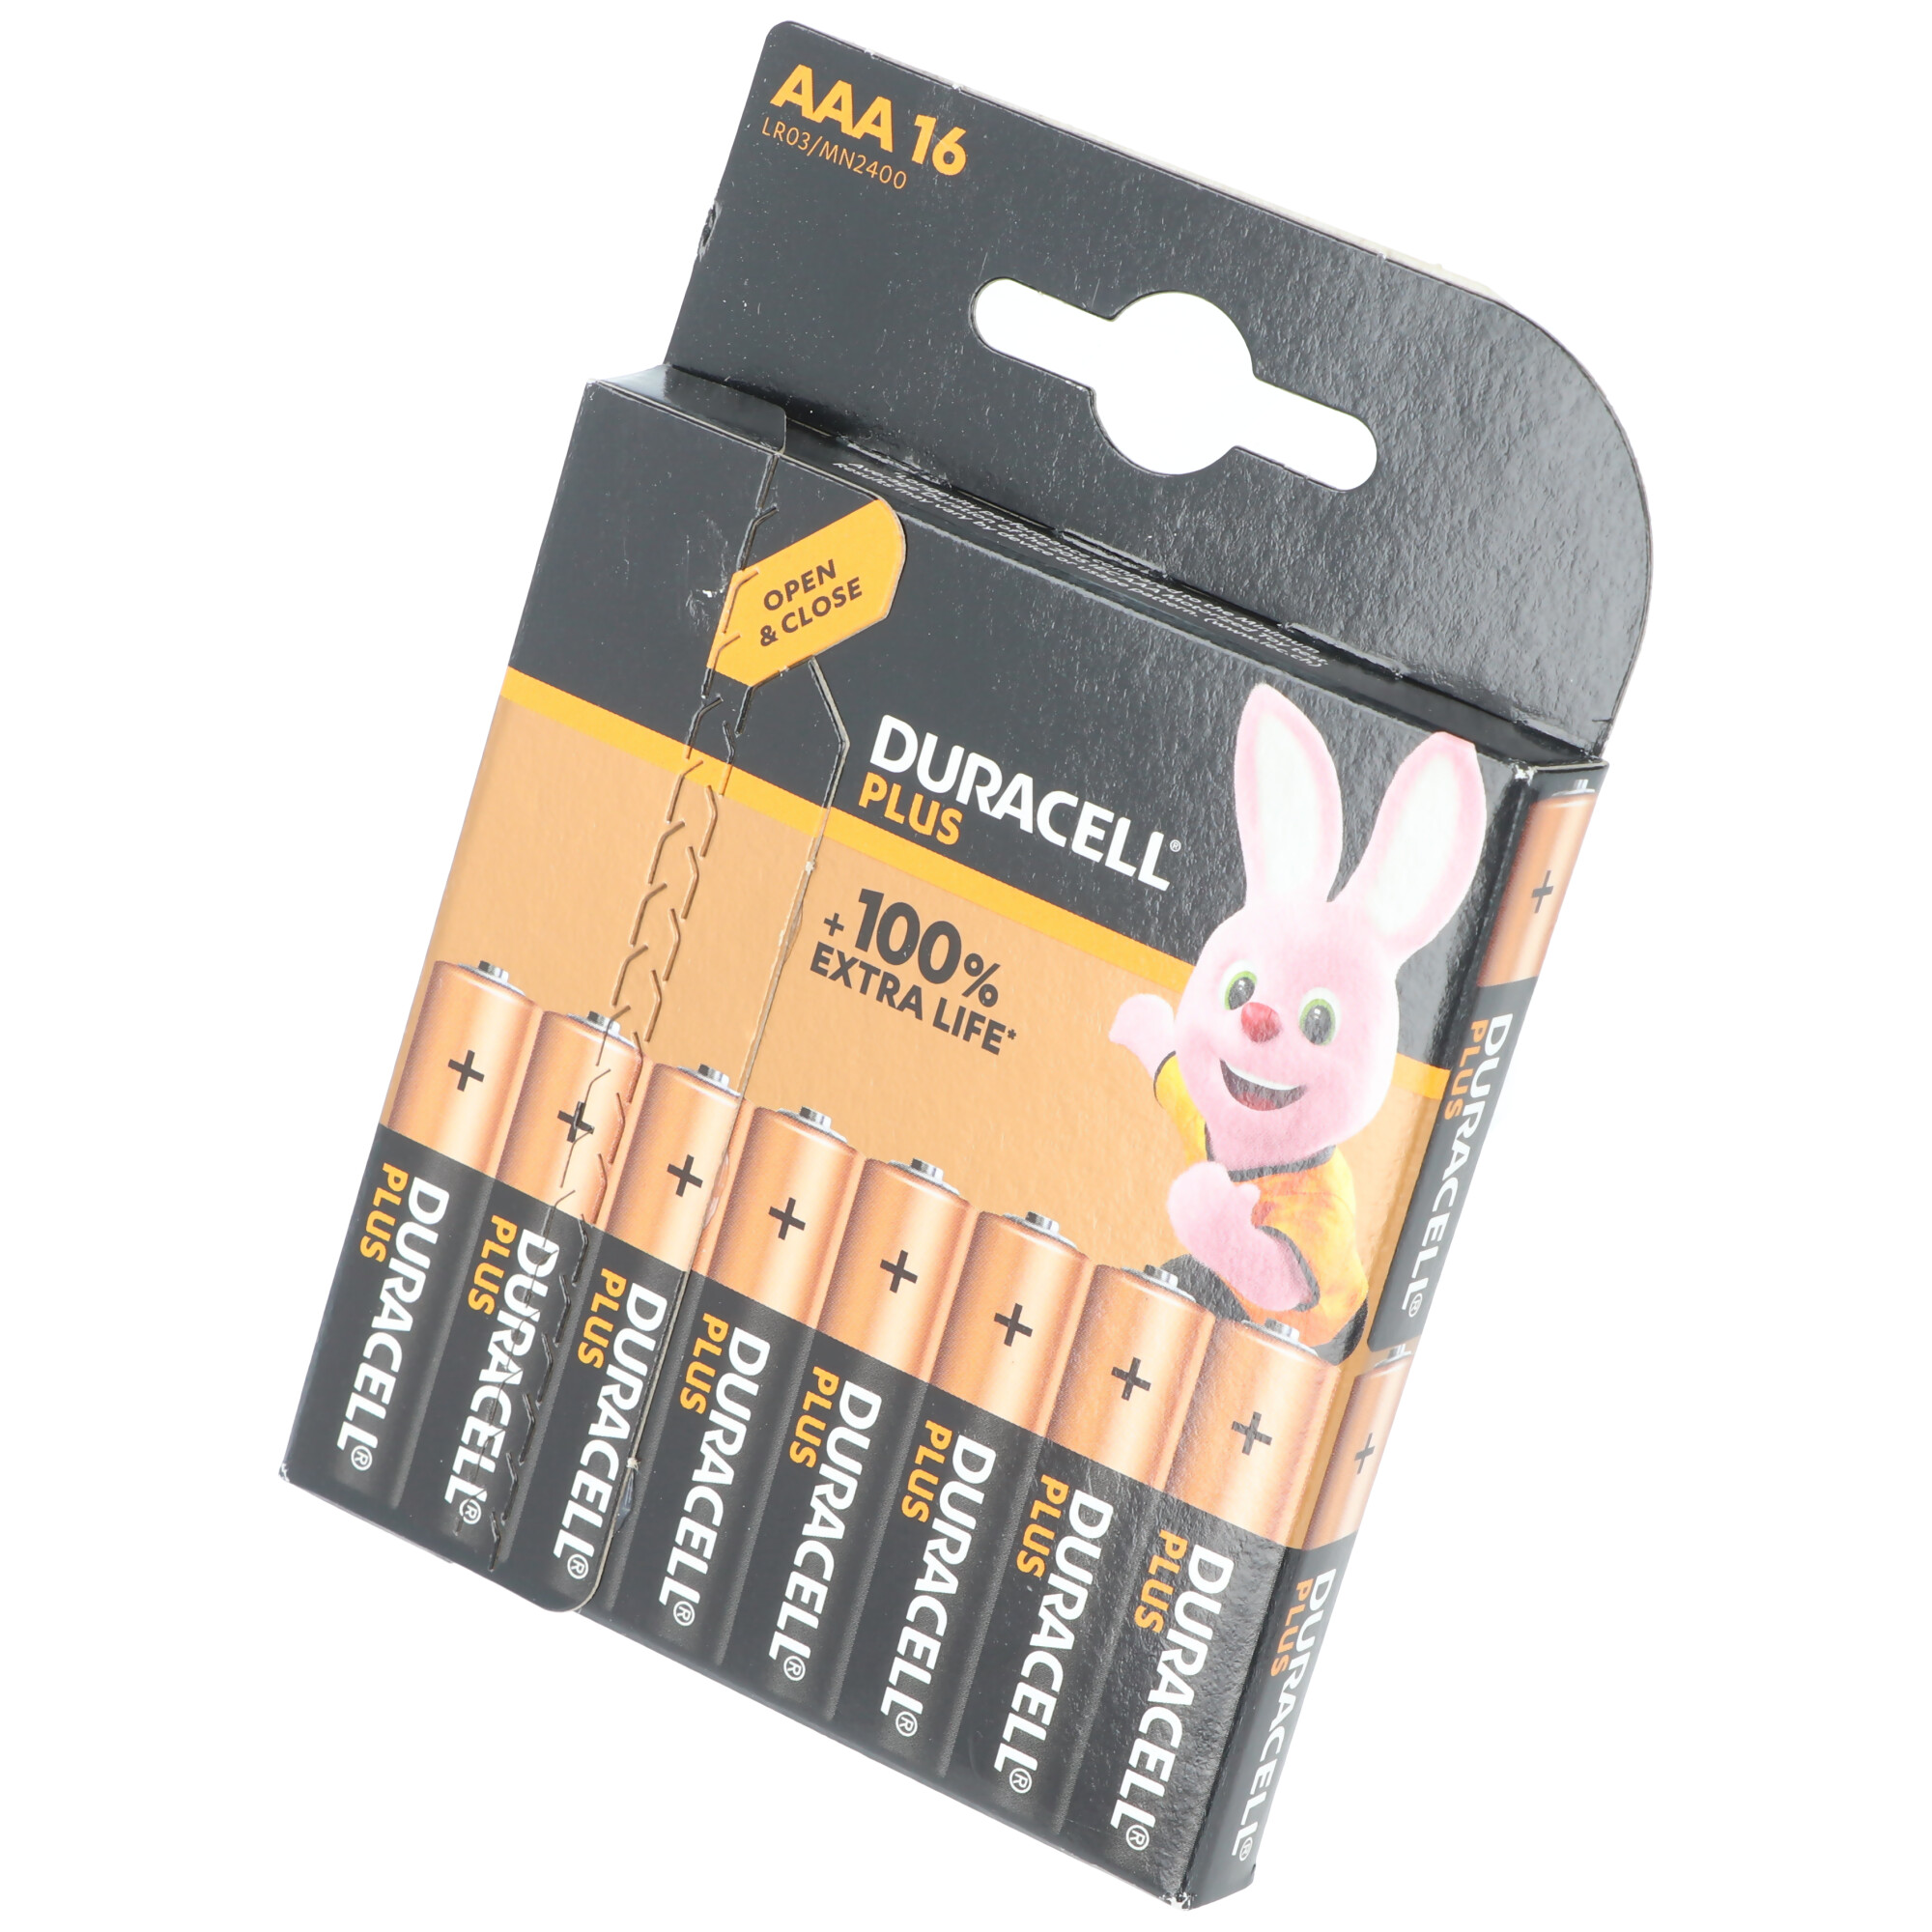 Duracell Batterie Alkaline, Micro, AAA, LR03, 1.5V Plus, Extra Life, Retail Blister (16-Pack)